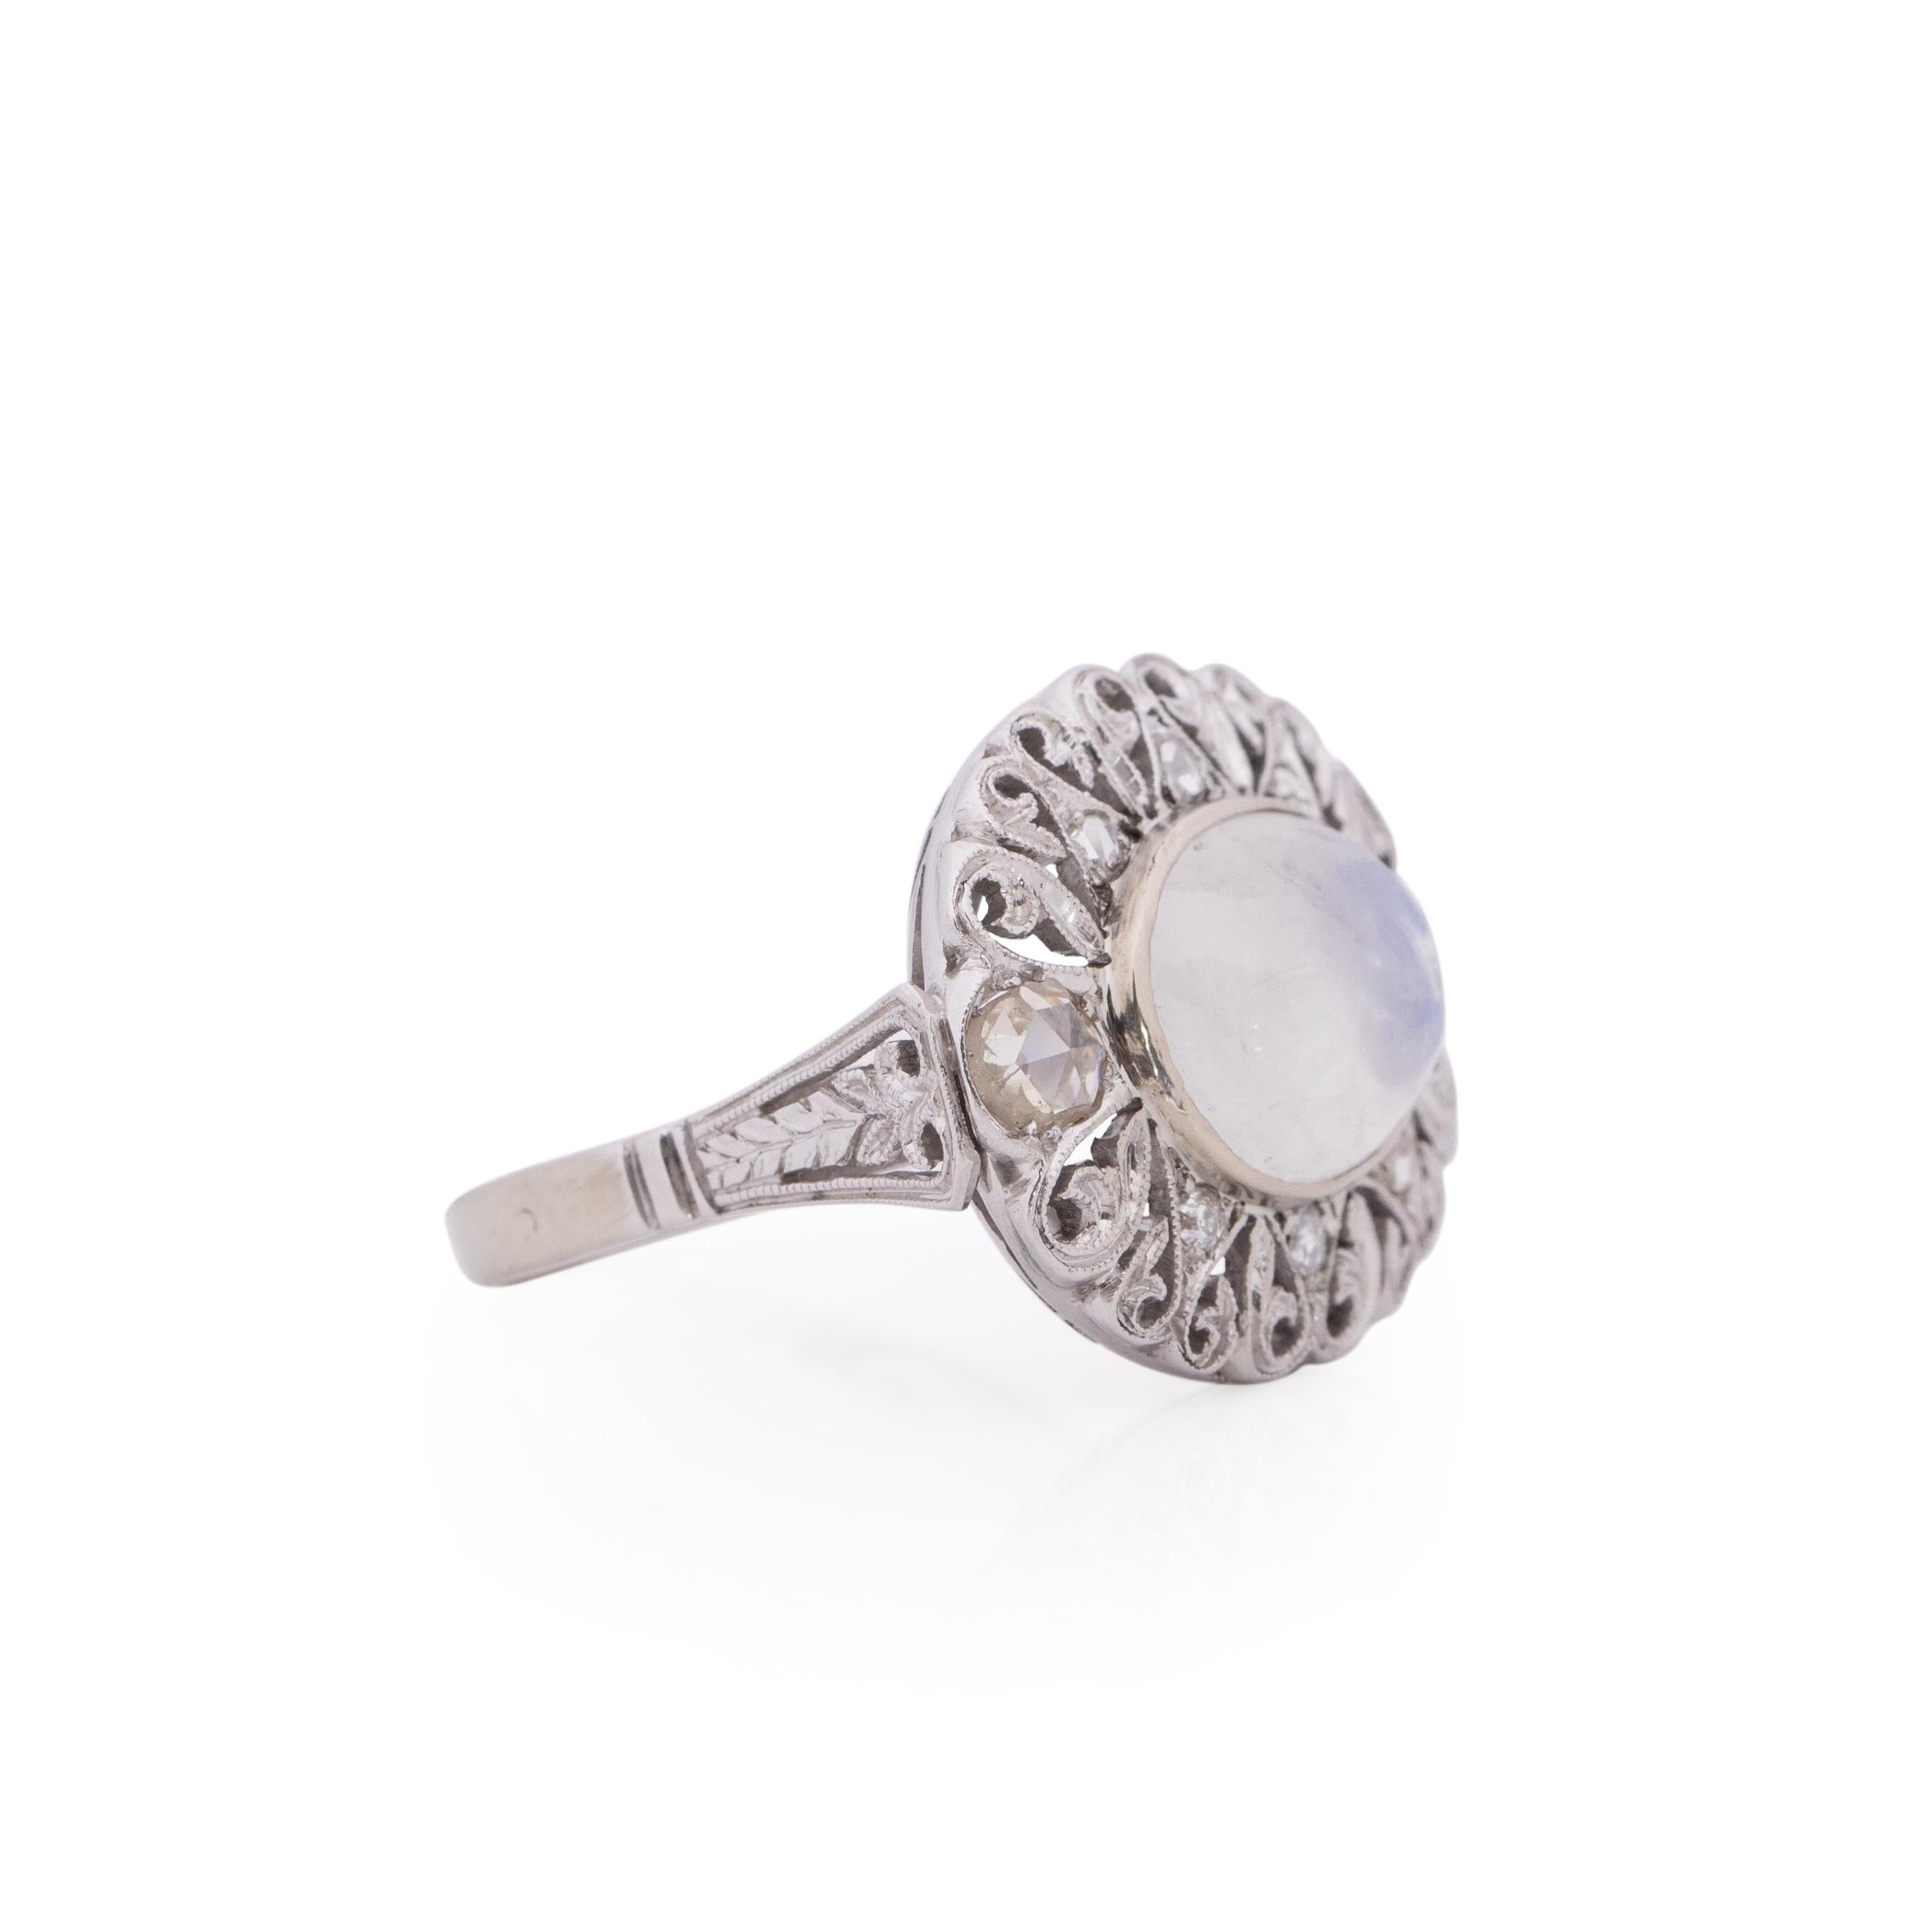 Here we have a breathtaking 5 carat iridescent Moonstone sitting in a elegantly crafted 18K white gold mount. The filigree detailed halo around the moonstone has two vibrant rose cut diamonds on either side, and accenting those beauties are 6